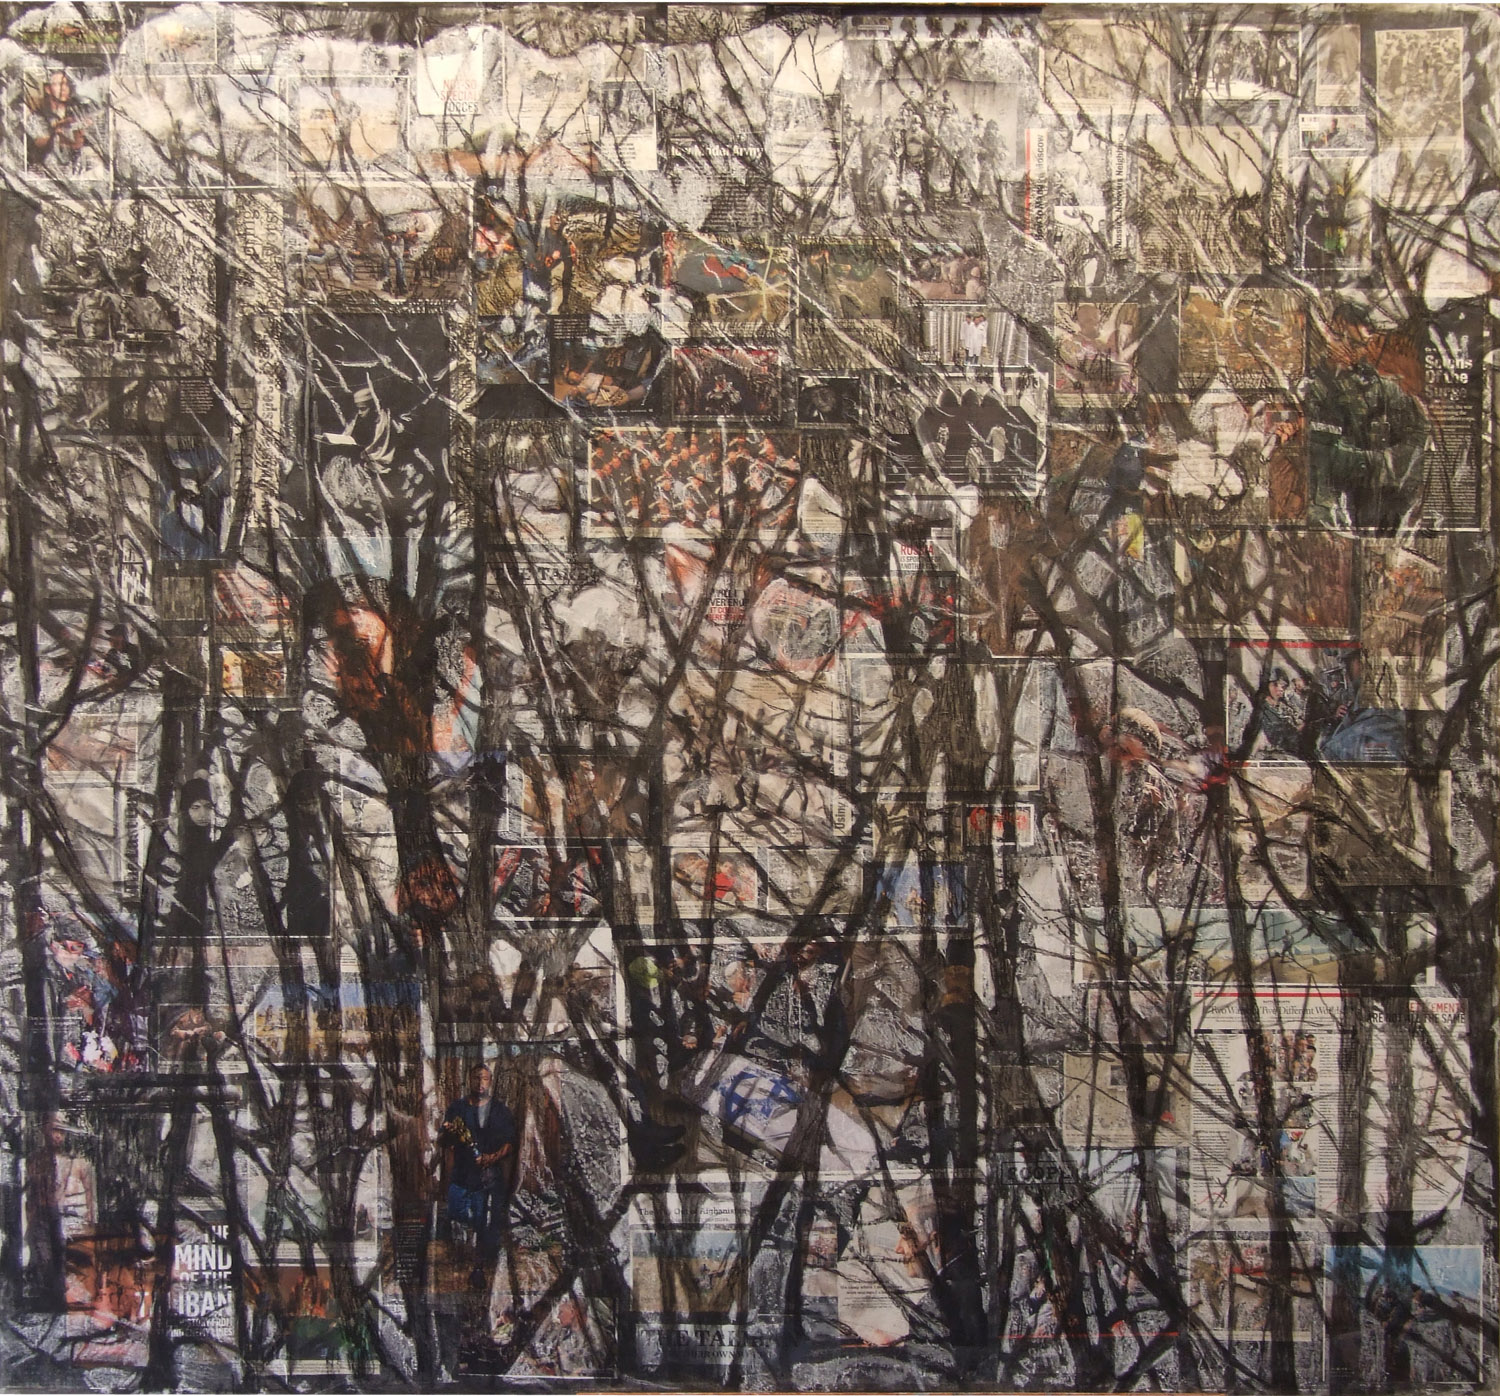 2ak(0)-Hedge-acrylic, charcoal, conte, print media collage on canvas, 60x55 in, 2008.jpg